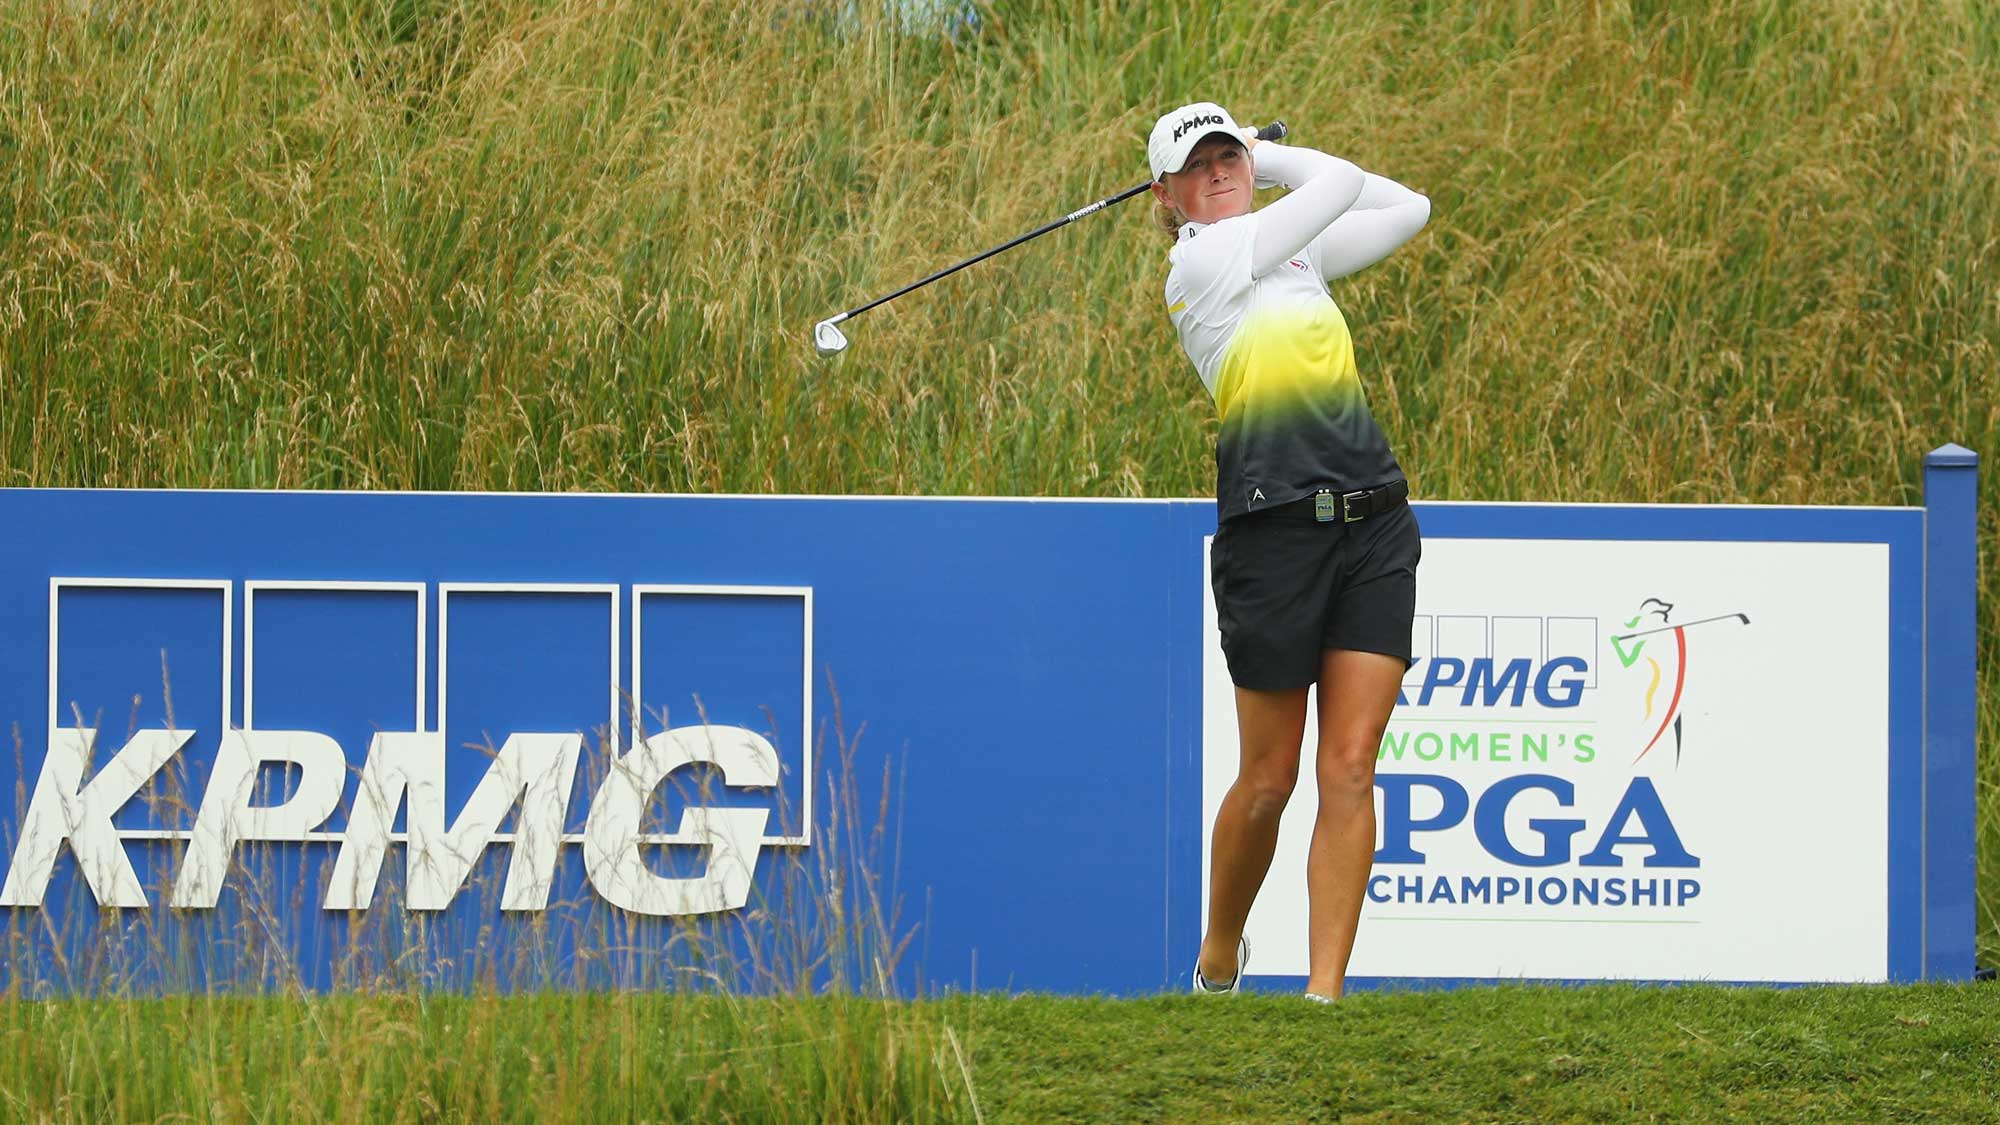 Stacy Lewis watches a tee shot on the 16th hole during the second round of the 2017 KPMG Women's PGA Championship